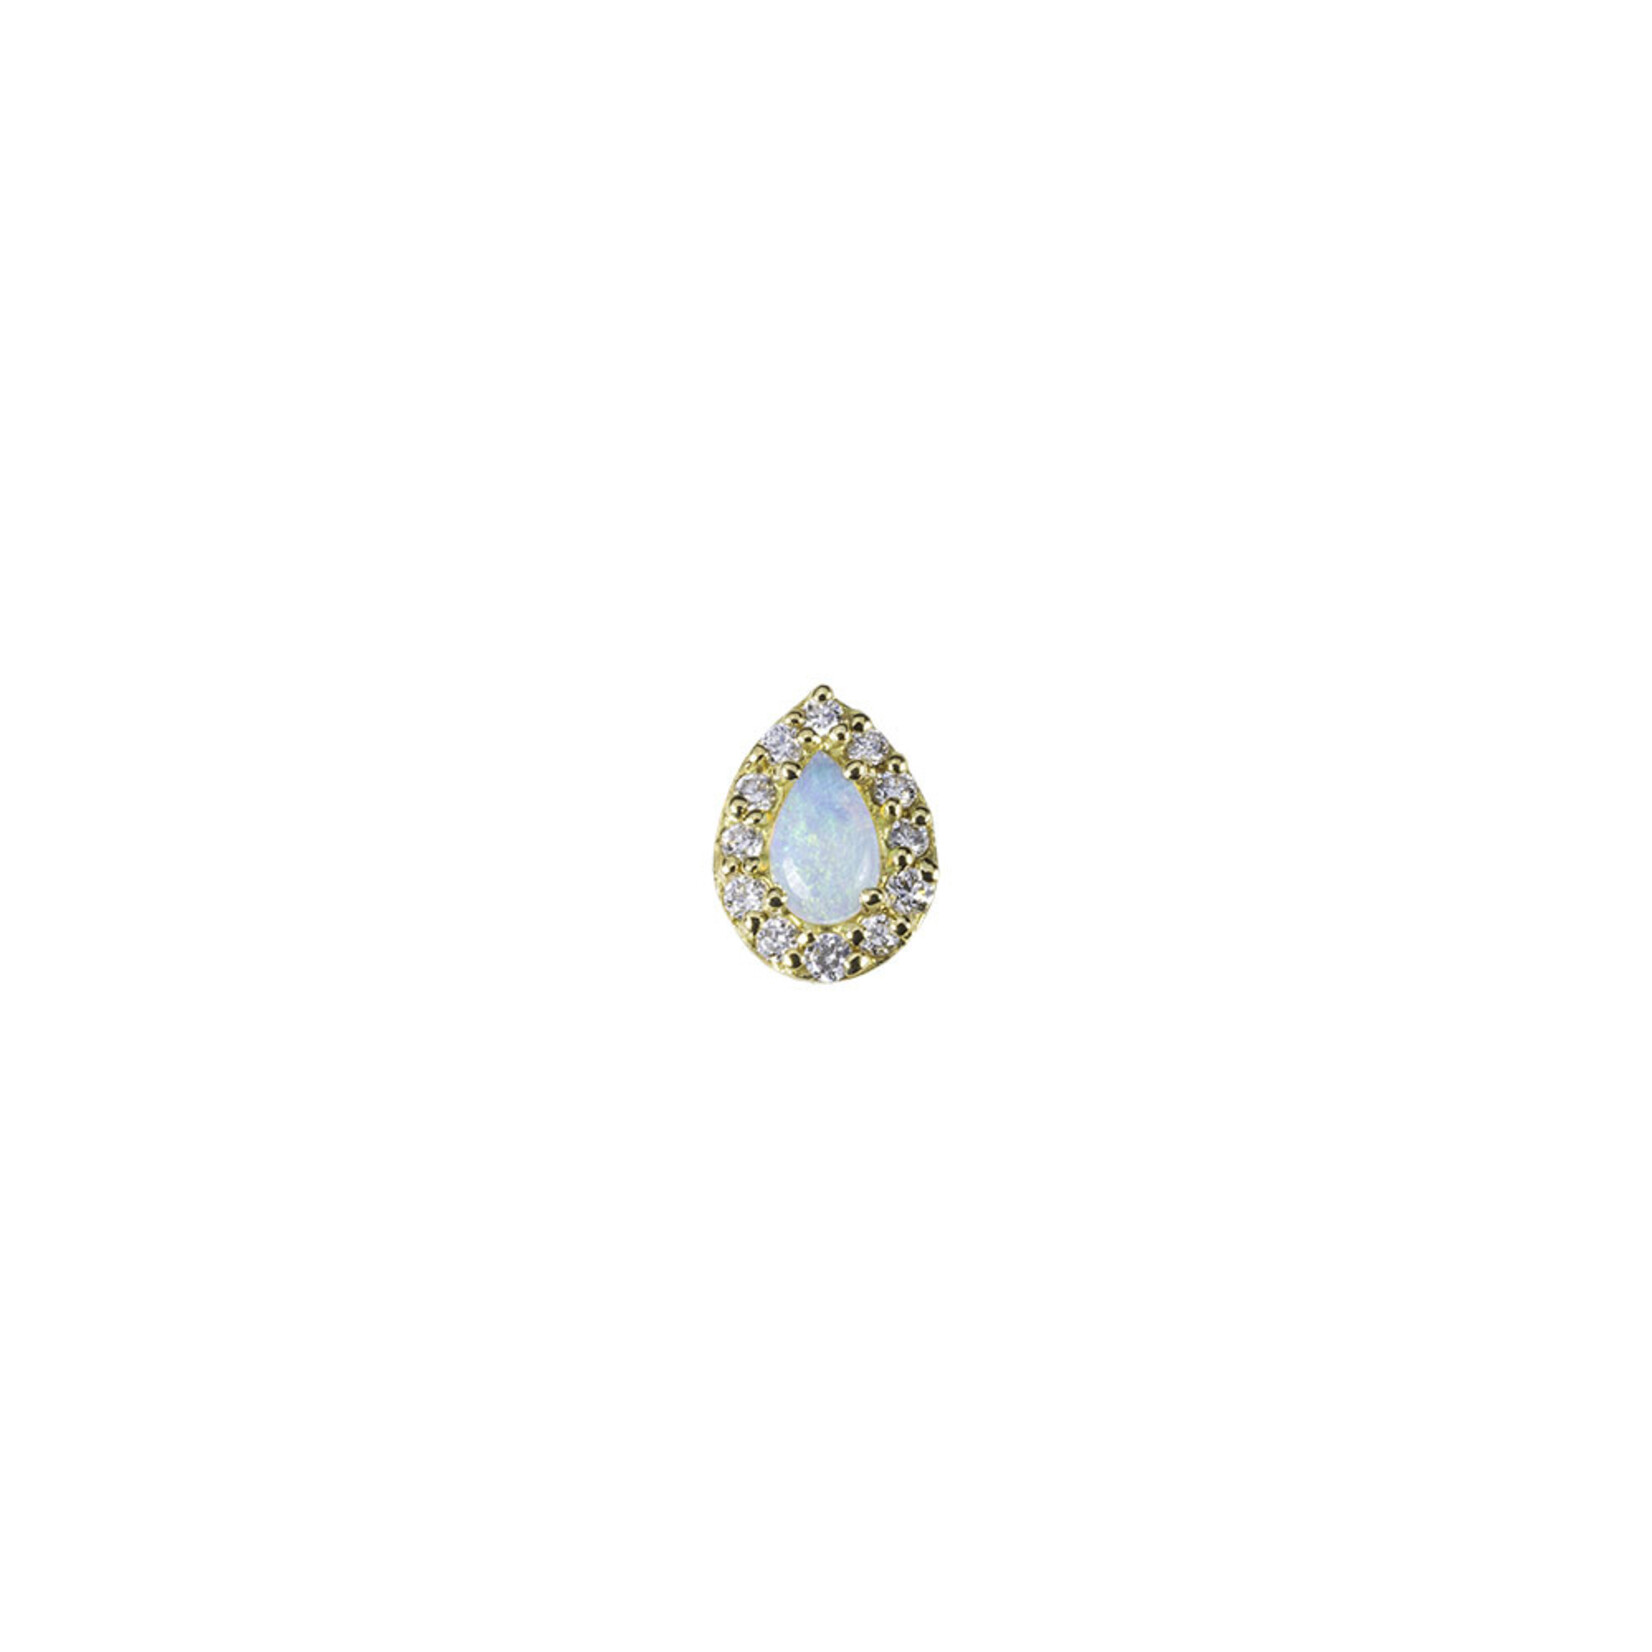 BVLA BVLA "Pear Altura" threaded end with 12x 1.0 VS1 diamond and 4x2.5 AAA white opal pear